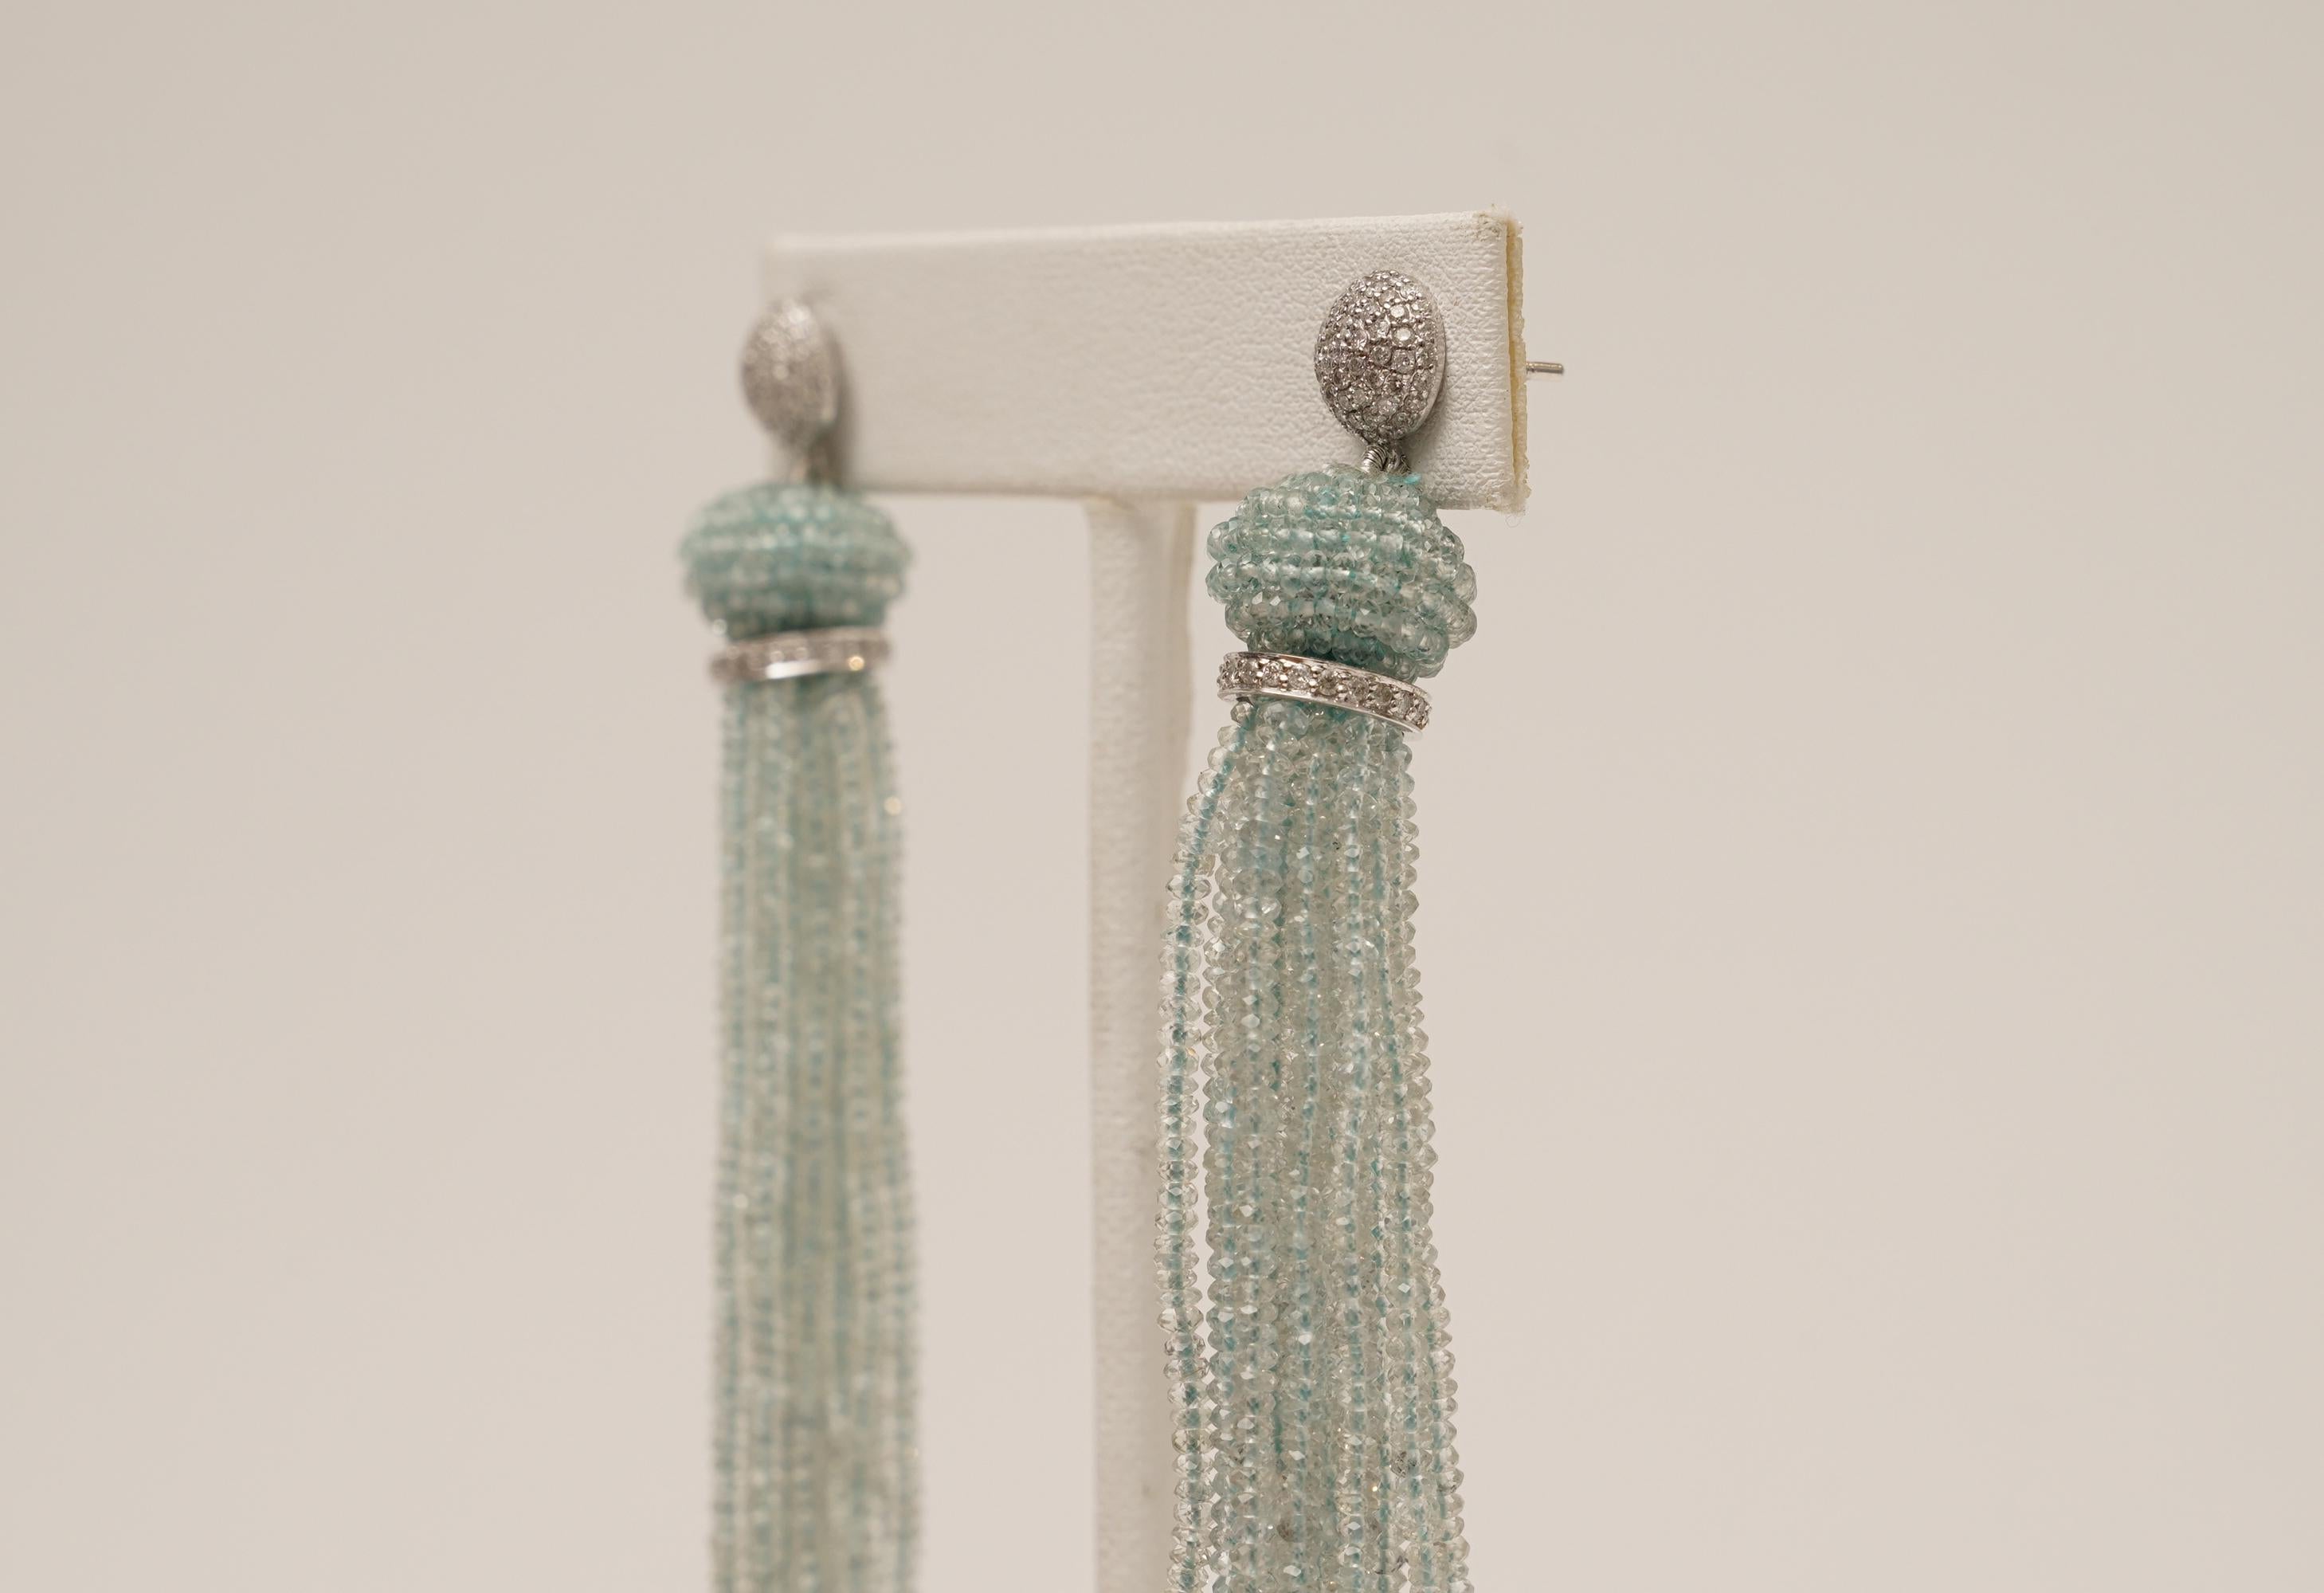 A pair of faceted aquamarine dangle tassel earrings with hand-woven aquamarine bead at the top with pave`-set diamond rondelle and earring post set in 18K white gold.  For pierced ears. Designed by Deborah Lockhart Phillips